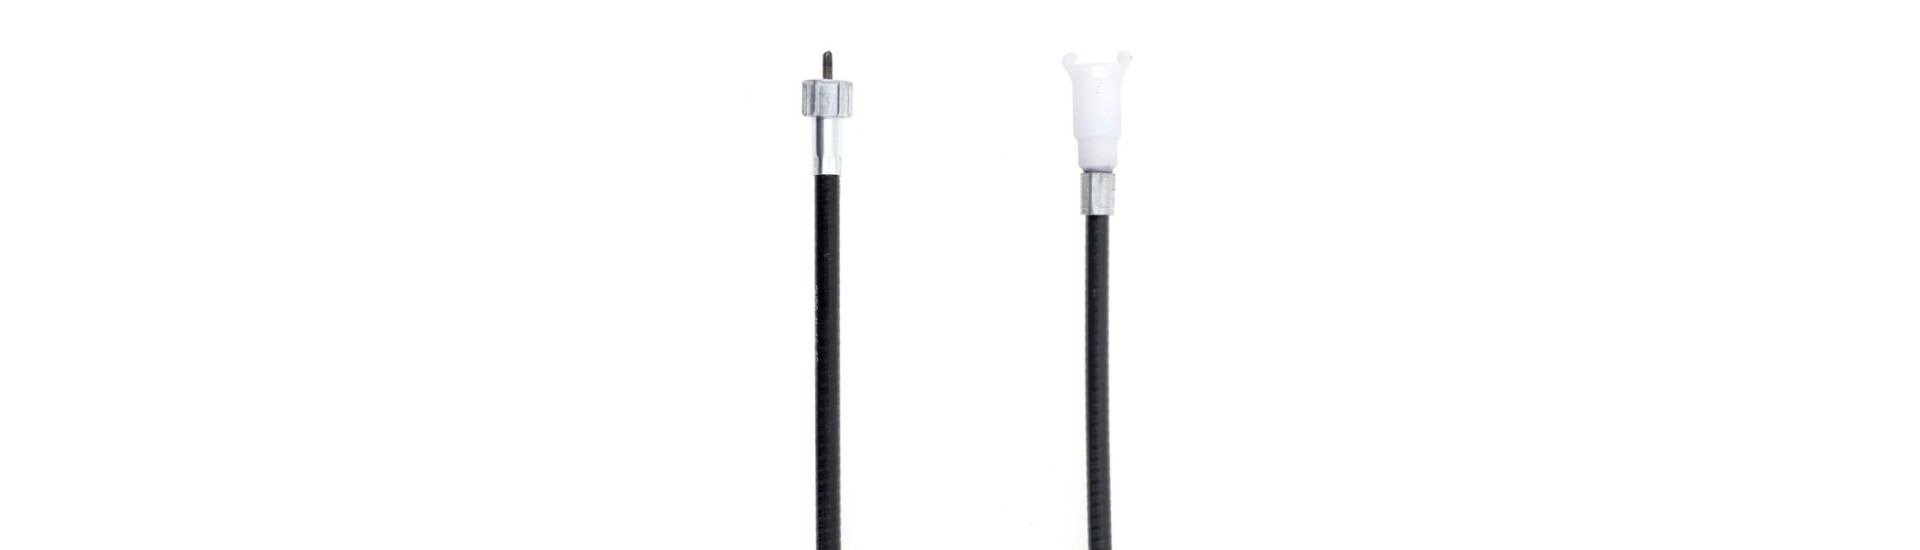 Best price counter cable for car without a permit